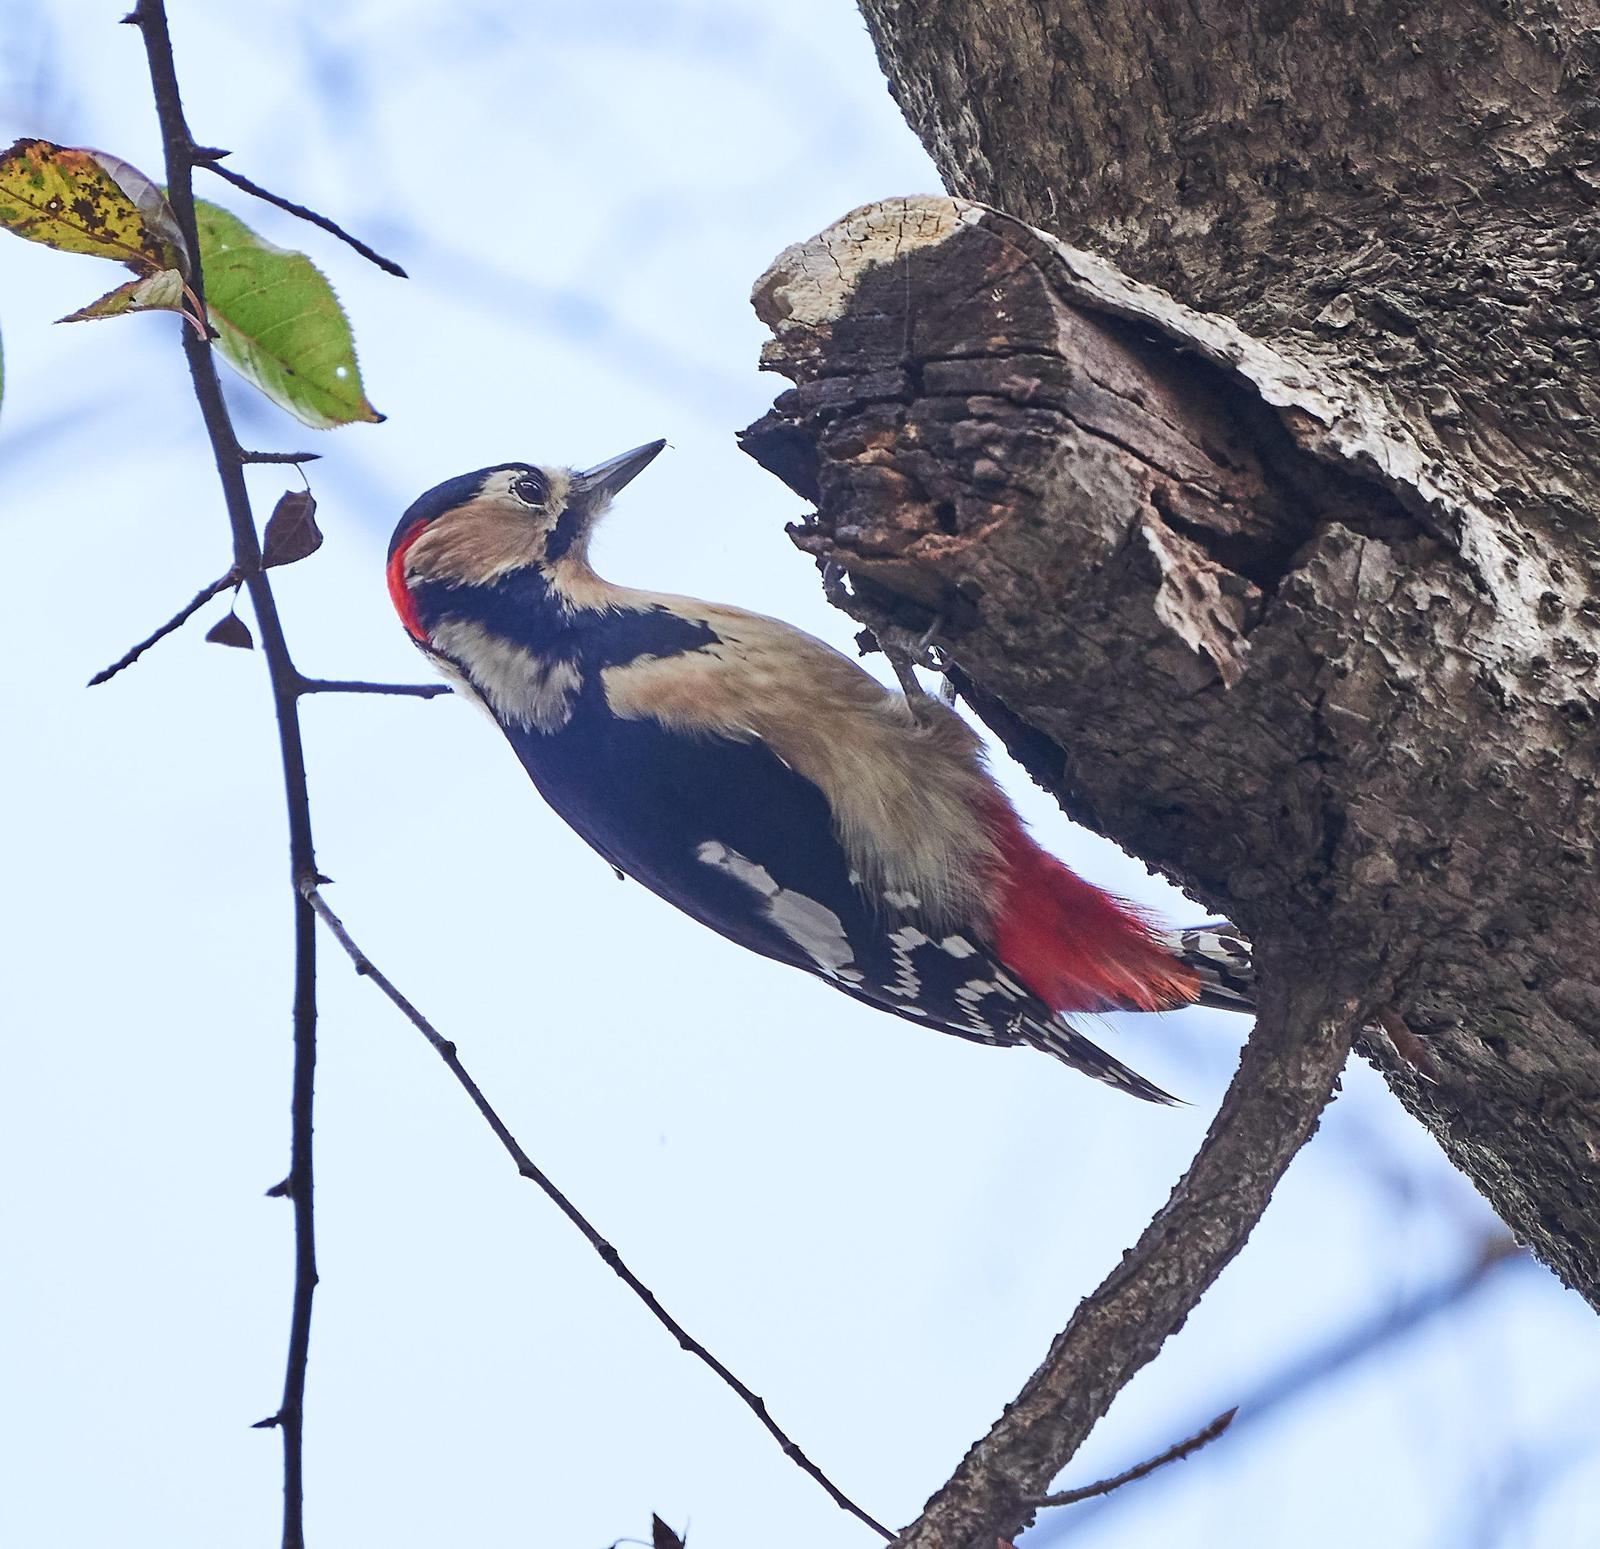 Great Spotted Woodpecker Photo by Steven Cheong